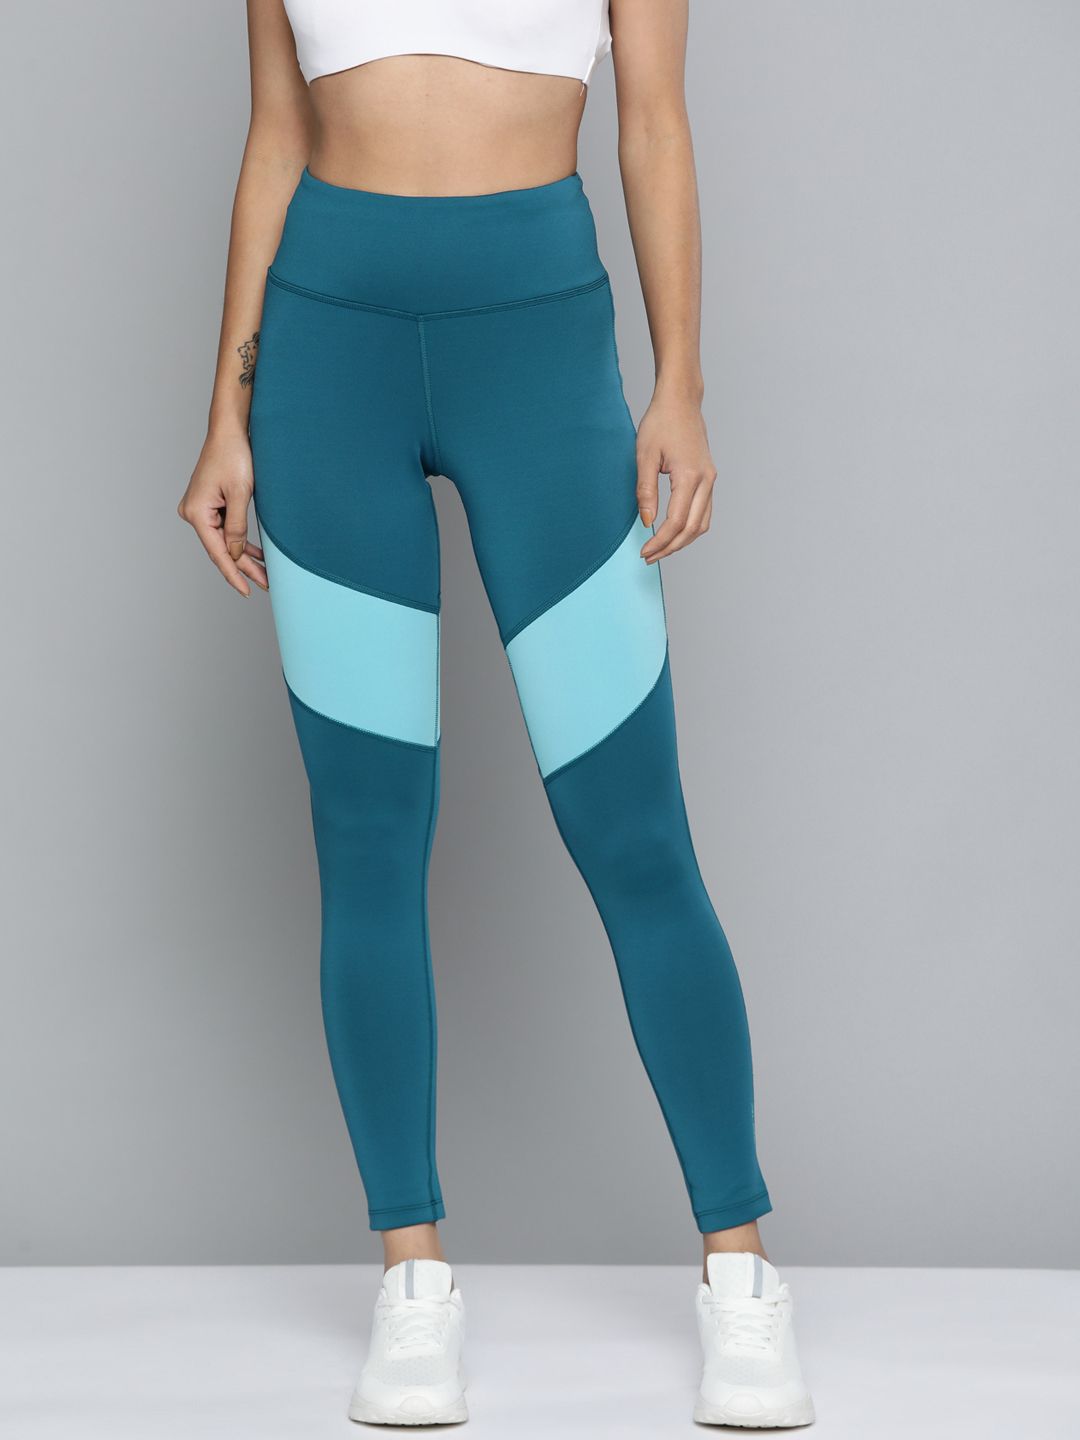 Alcis Women Blue Colourblocked Cropped Sport Tights Price in India